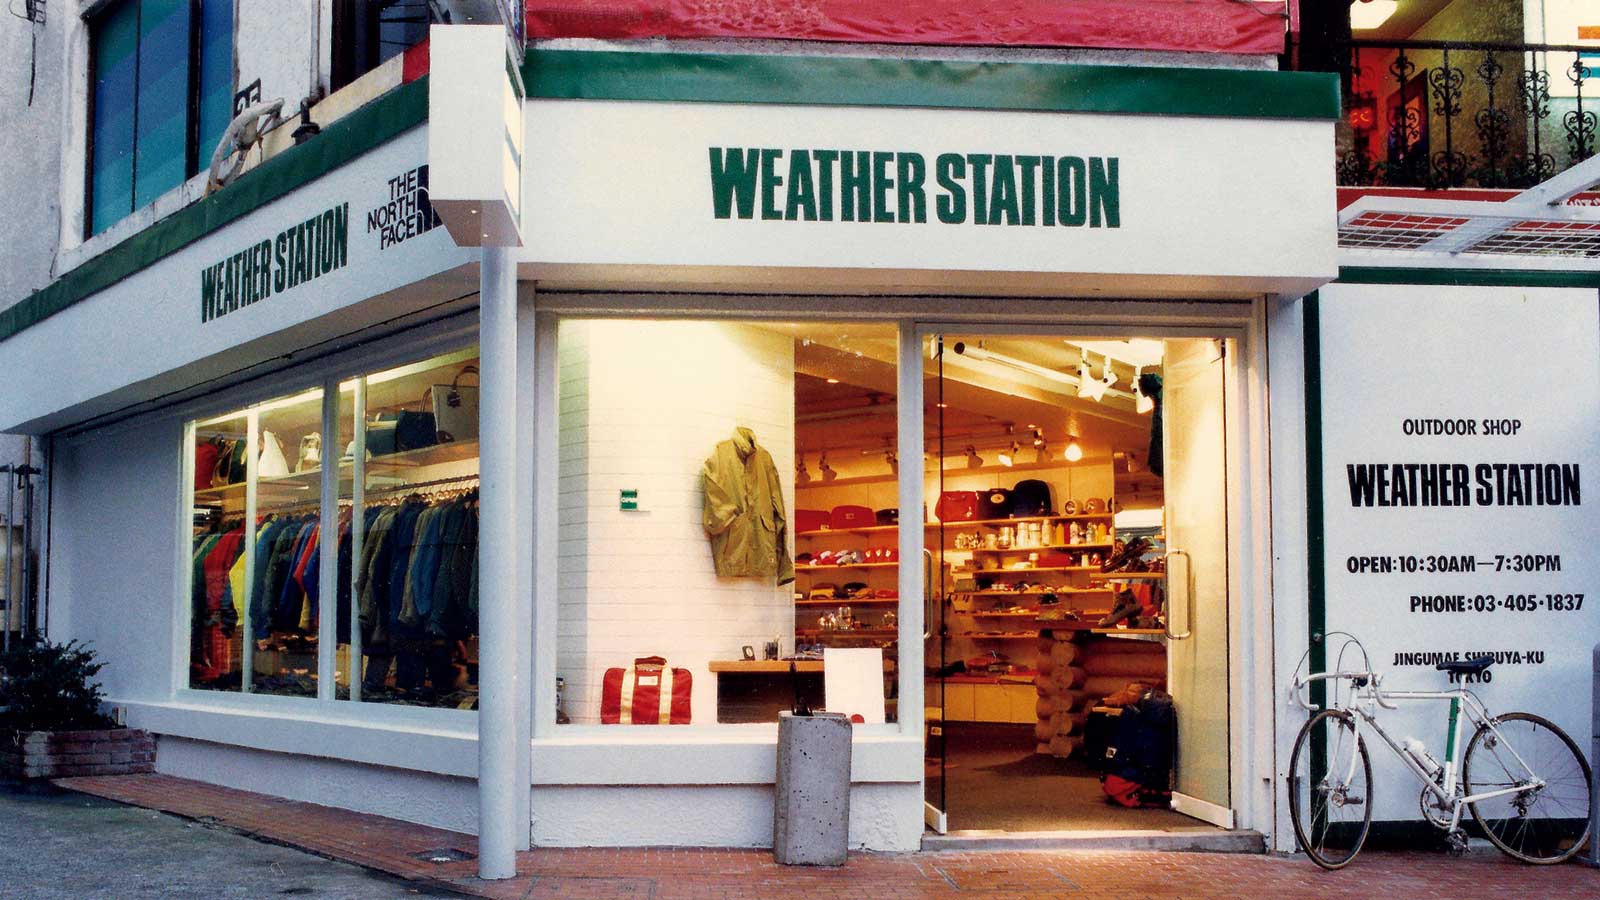 1983 WEATHER STATION 